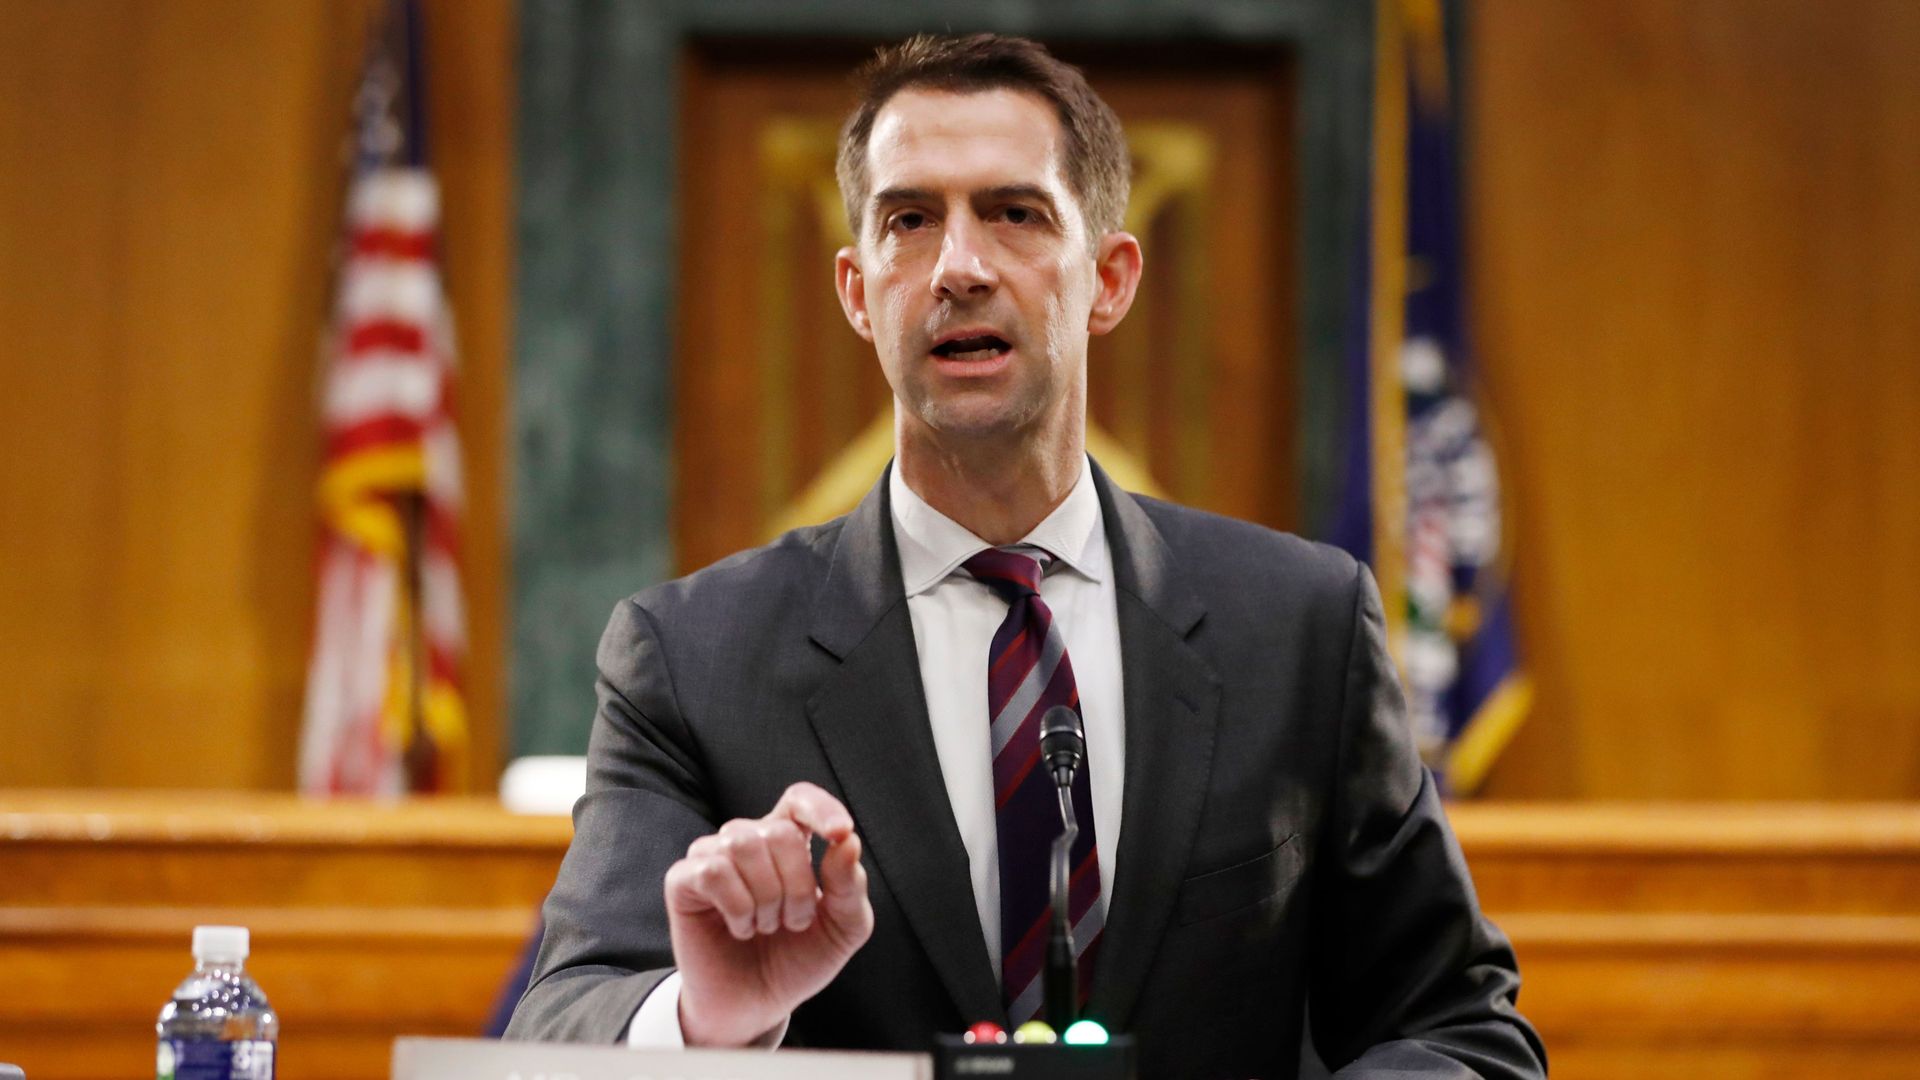 Sen. Tom Cotton, R-AR speaks during a Senate Intelligence Committee nomination hearing for Rep. John Ratcliffe, R-TX, on Capitol Hill in Washington,DC 